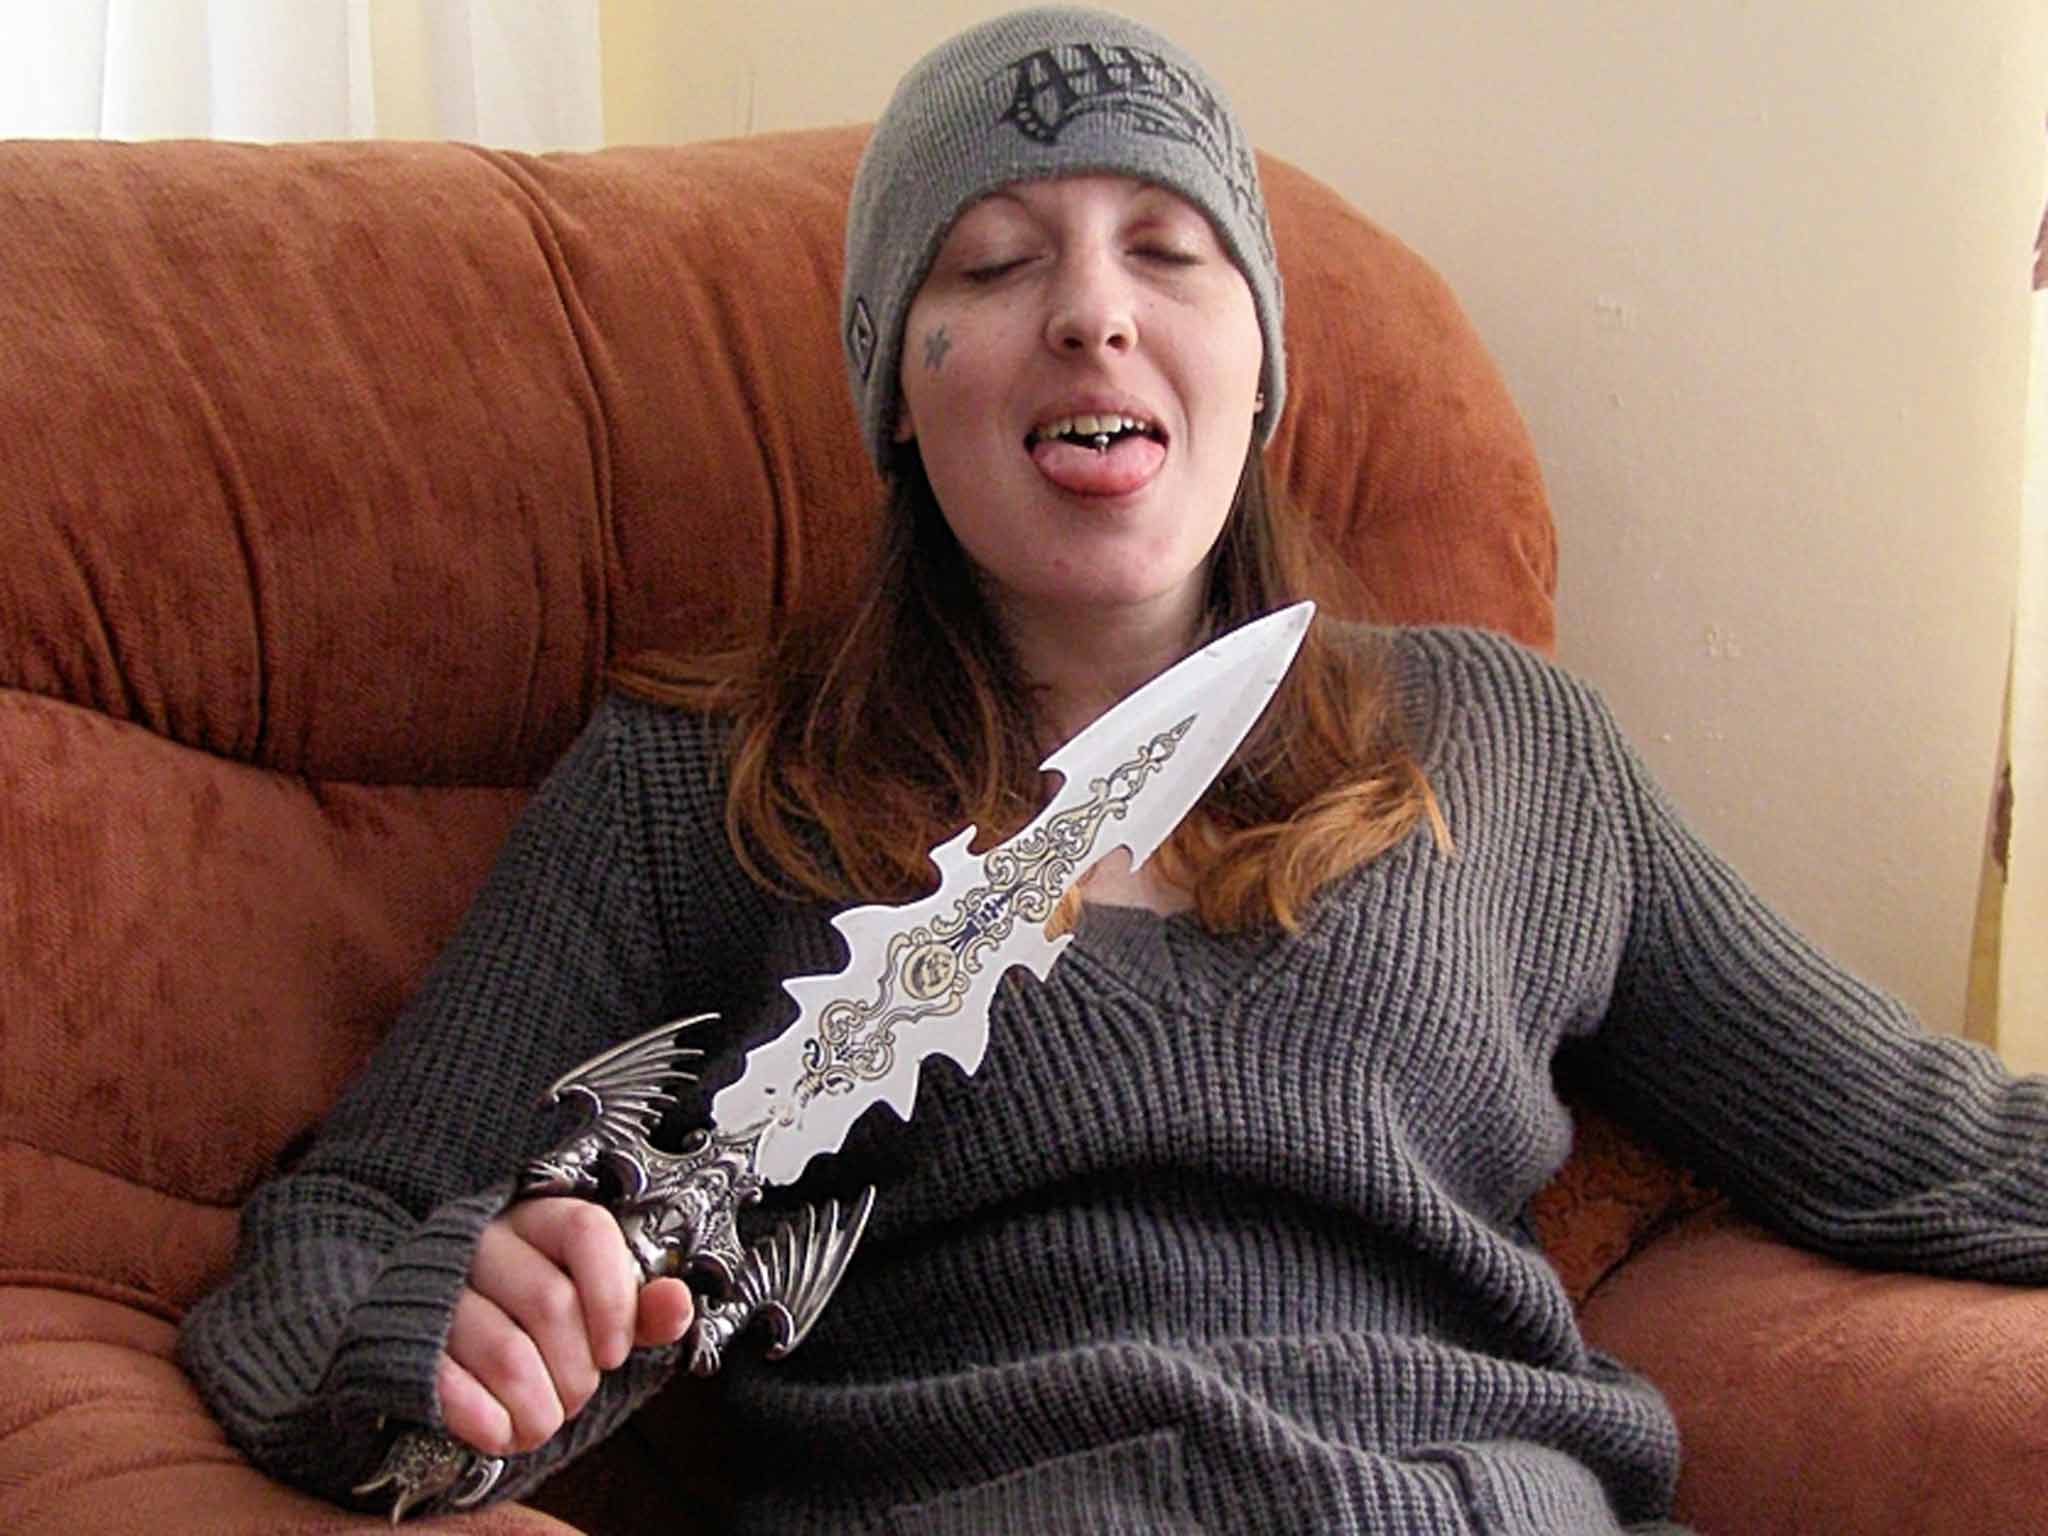 Deadly disorder: serial killer Joanna Dennehy was among the extreme personalities profiled